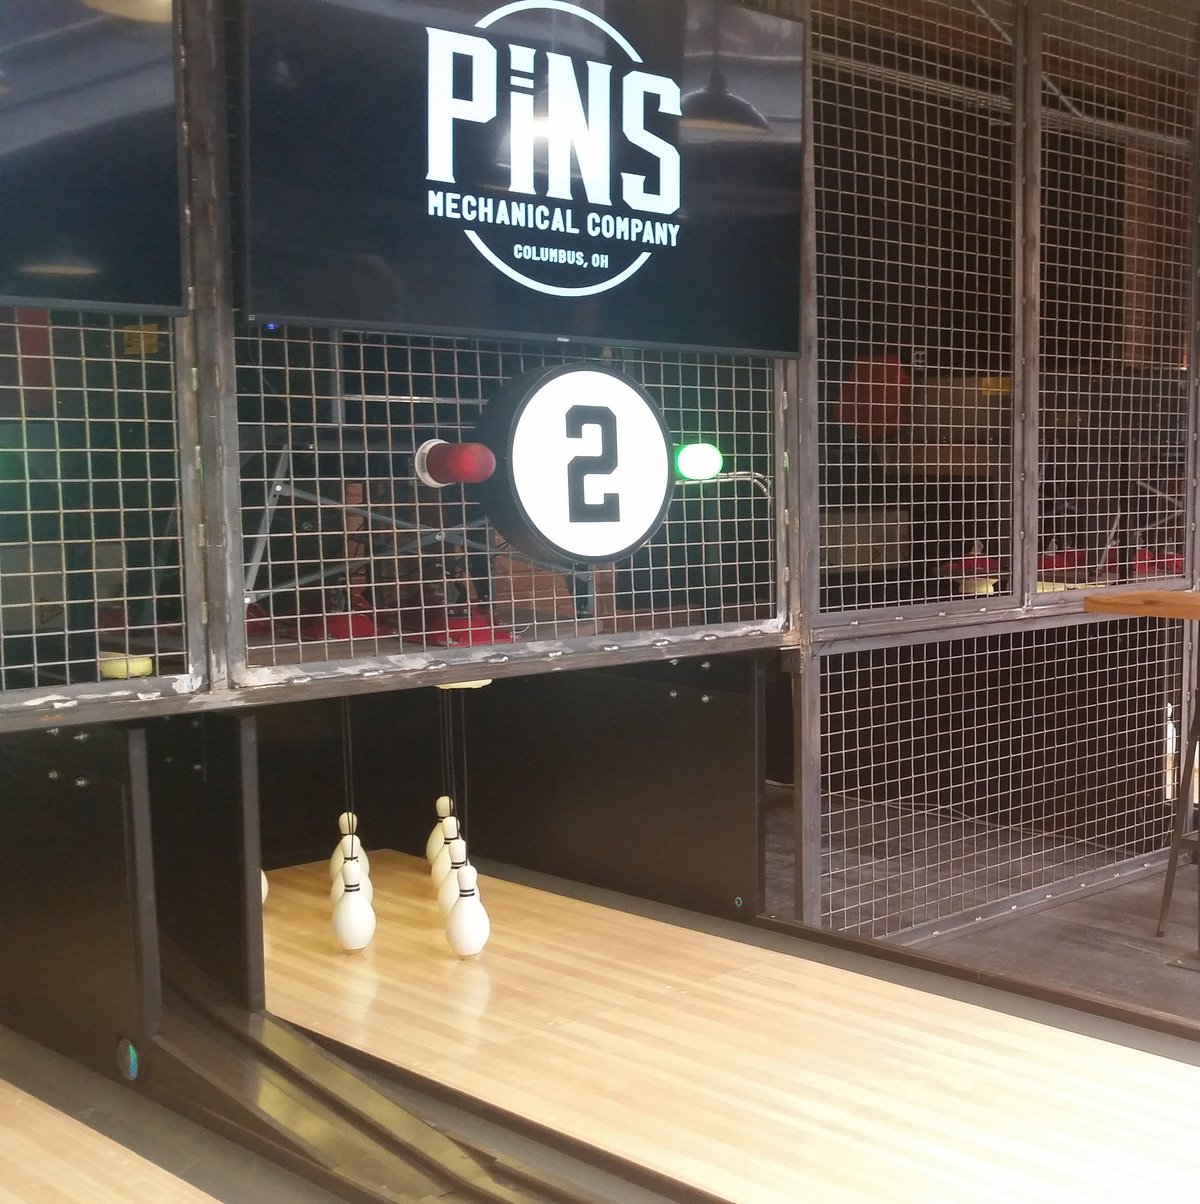 Pins Mechanical/16-Bit coming to Cleveland's Ohio City neighborhood -  Columbus Business First